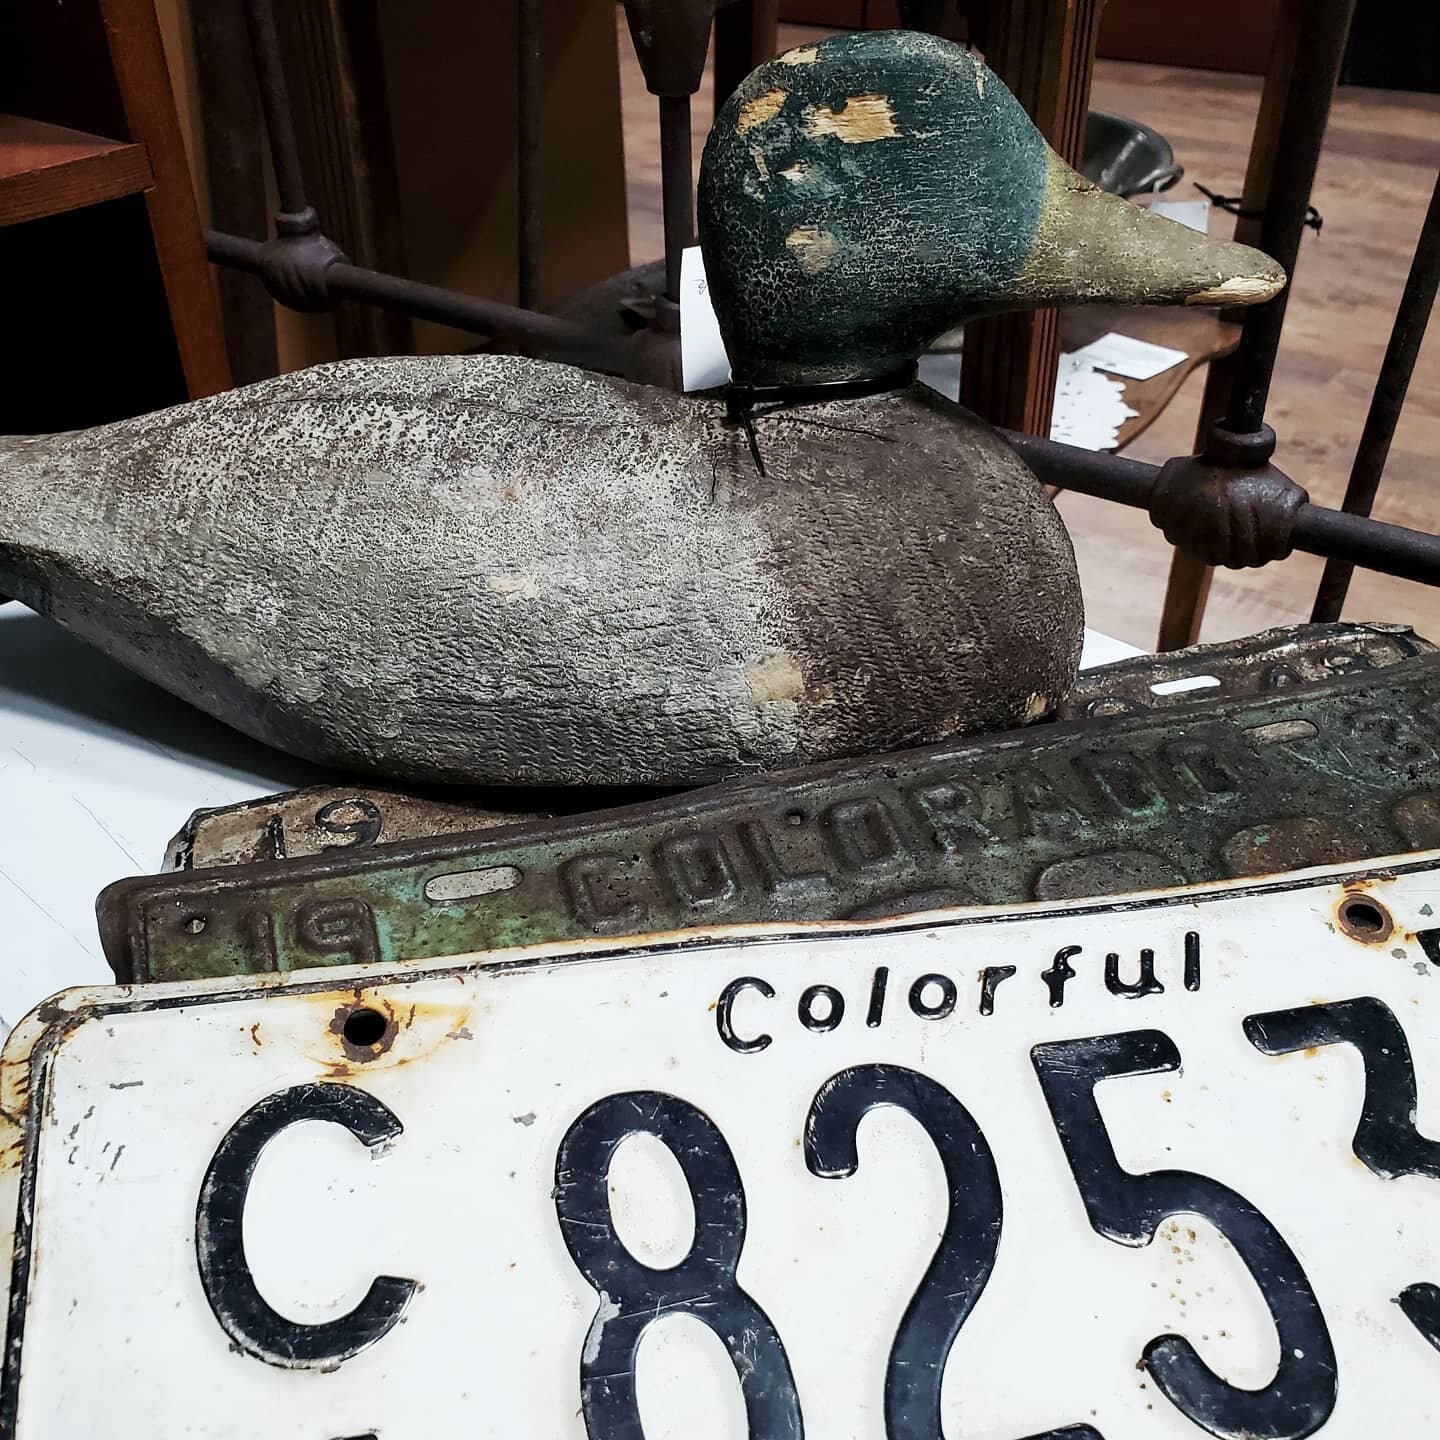 One of the things we love about antiques is the patina that comes with years of use. Rust and chippy paint turn so many utilitarian items into treasures! Tell us: Do you like to find old treasures in perfect condition, restored, or with a little wear